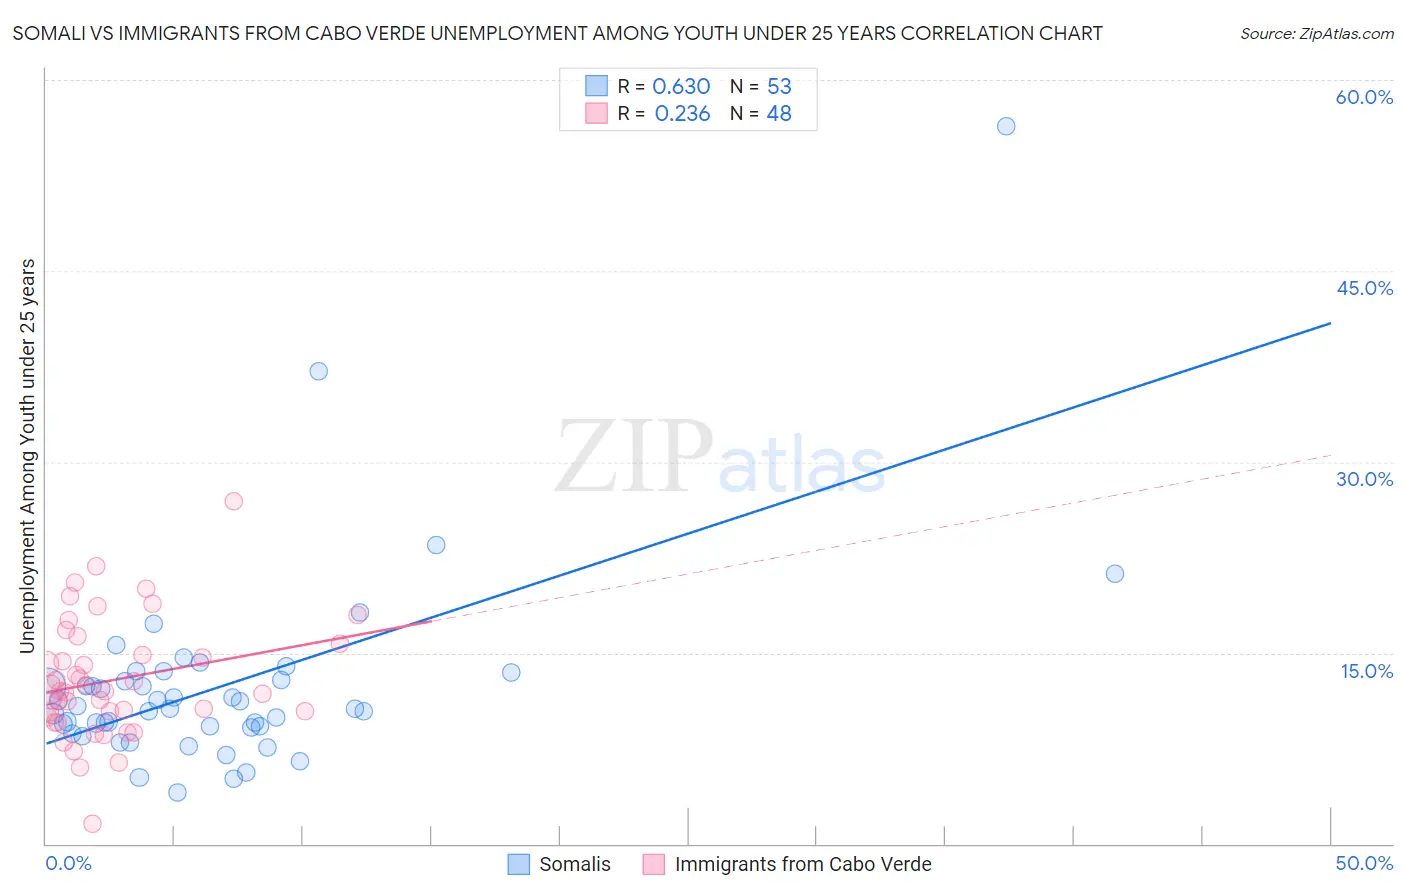 Somali vs Immigrants from Cabo Verde Unemployment Among Youth under 25 years